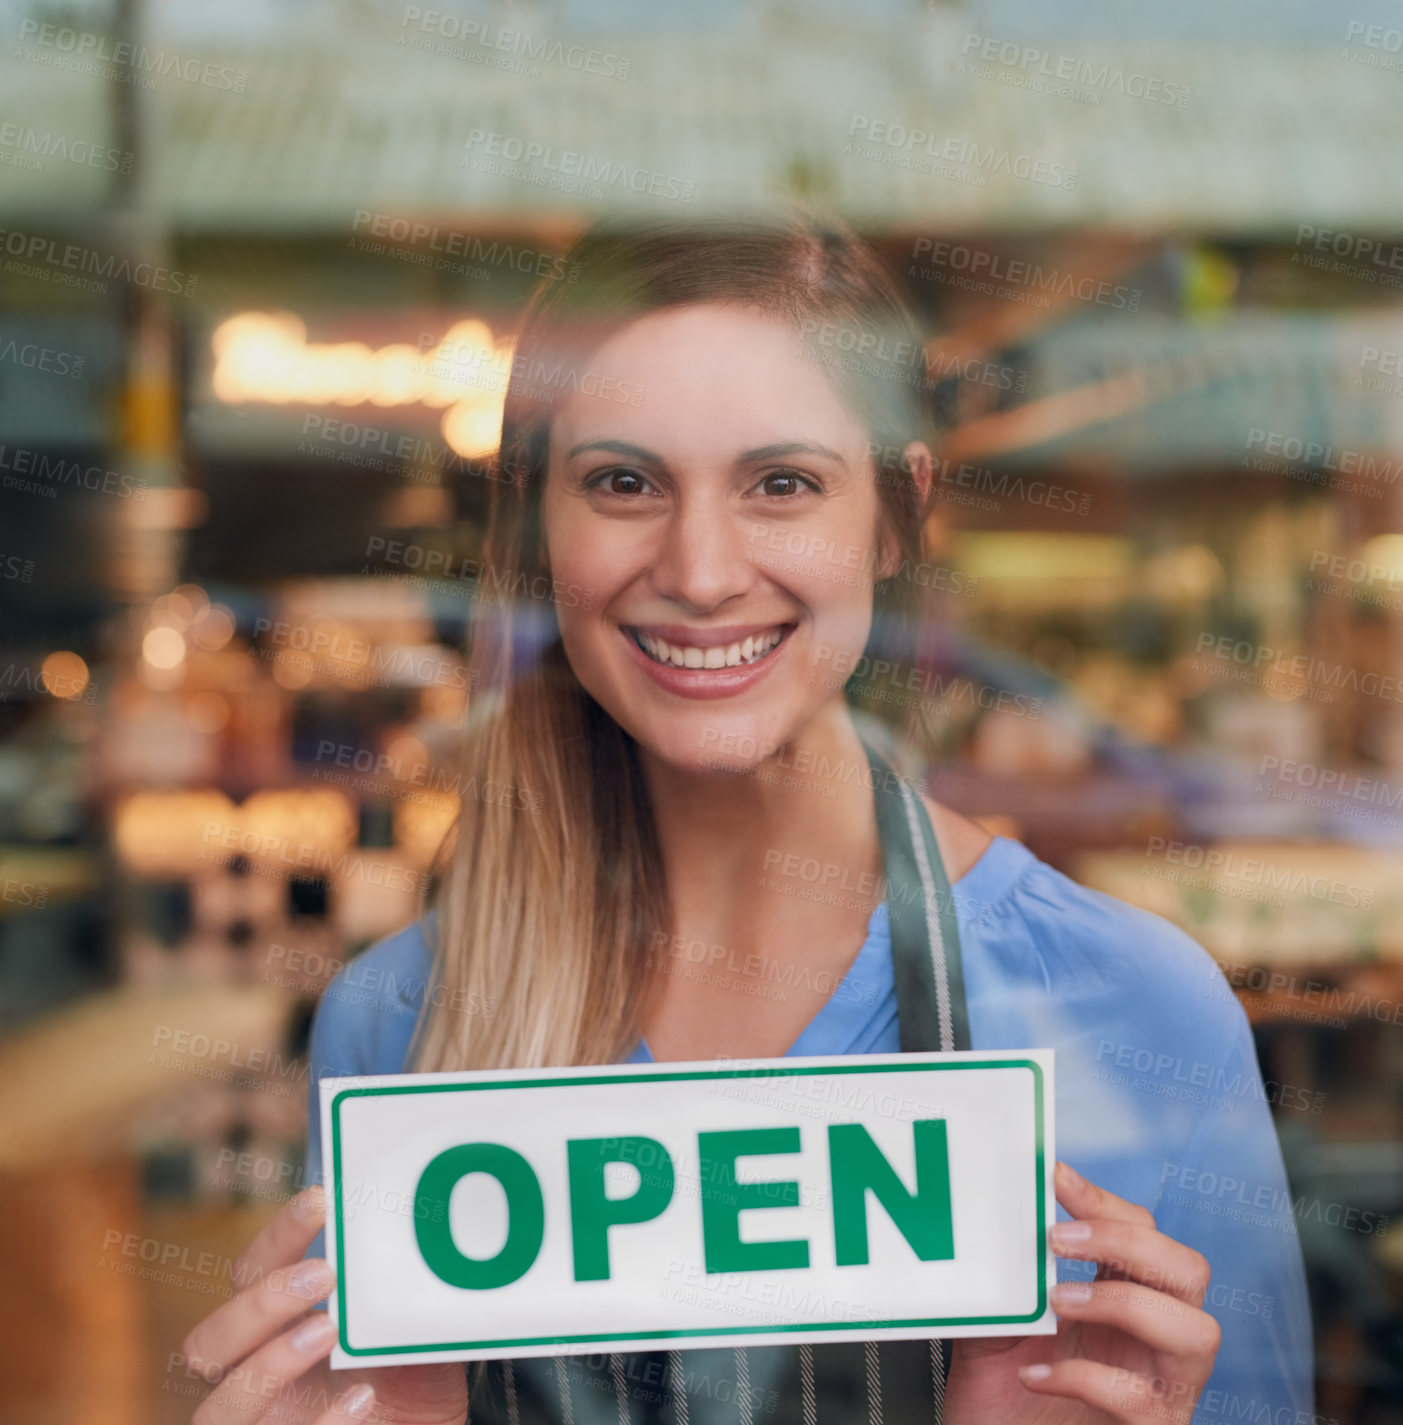 Buy stock photo Cropped portrait of an attractive young woman opening up her coffee shop